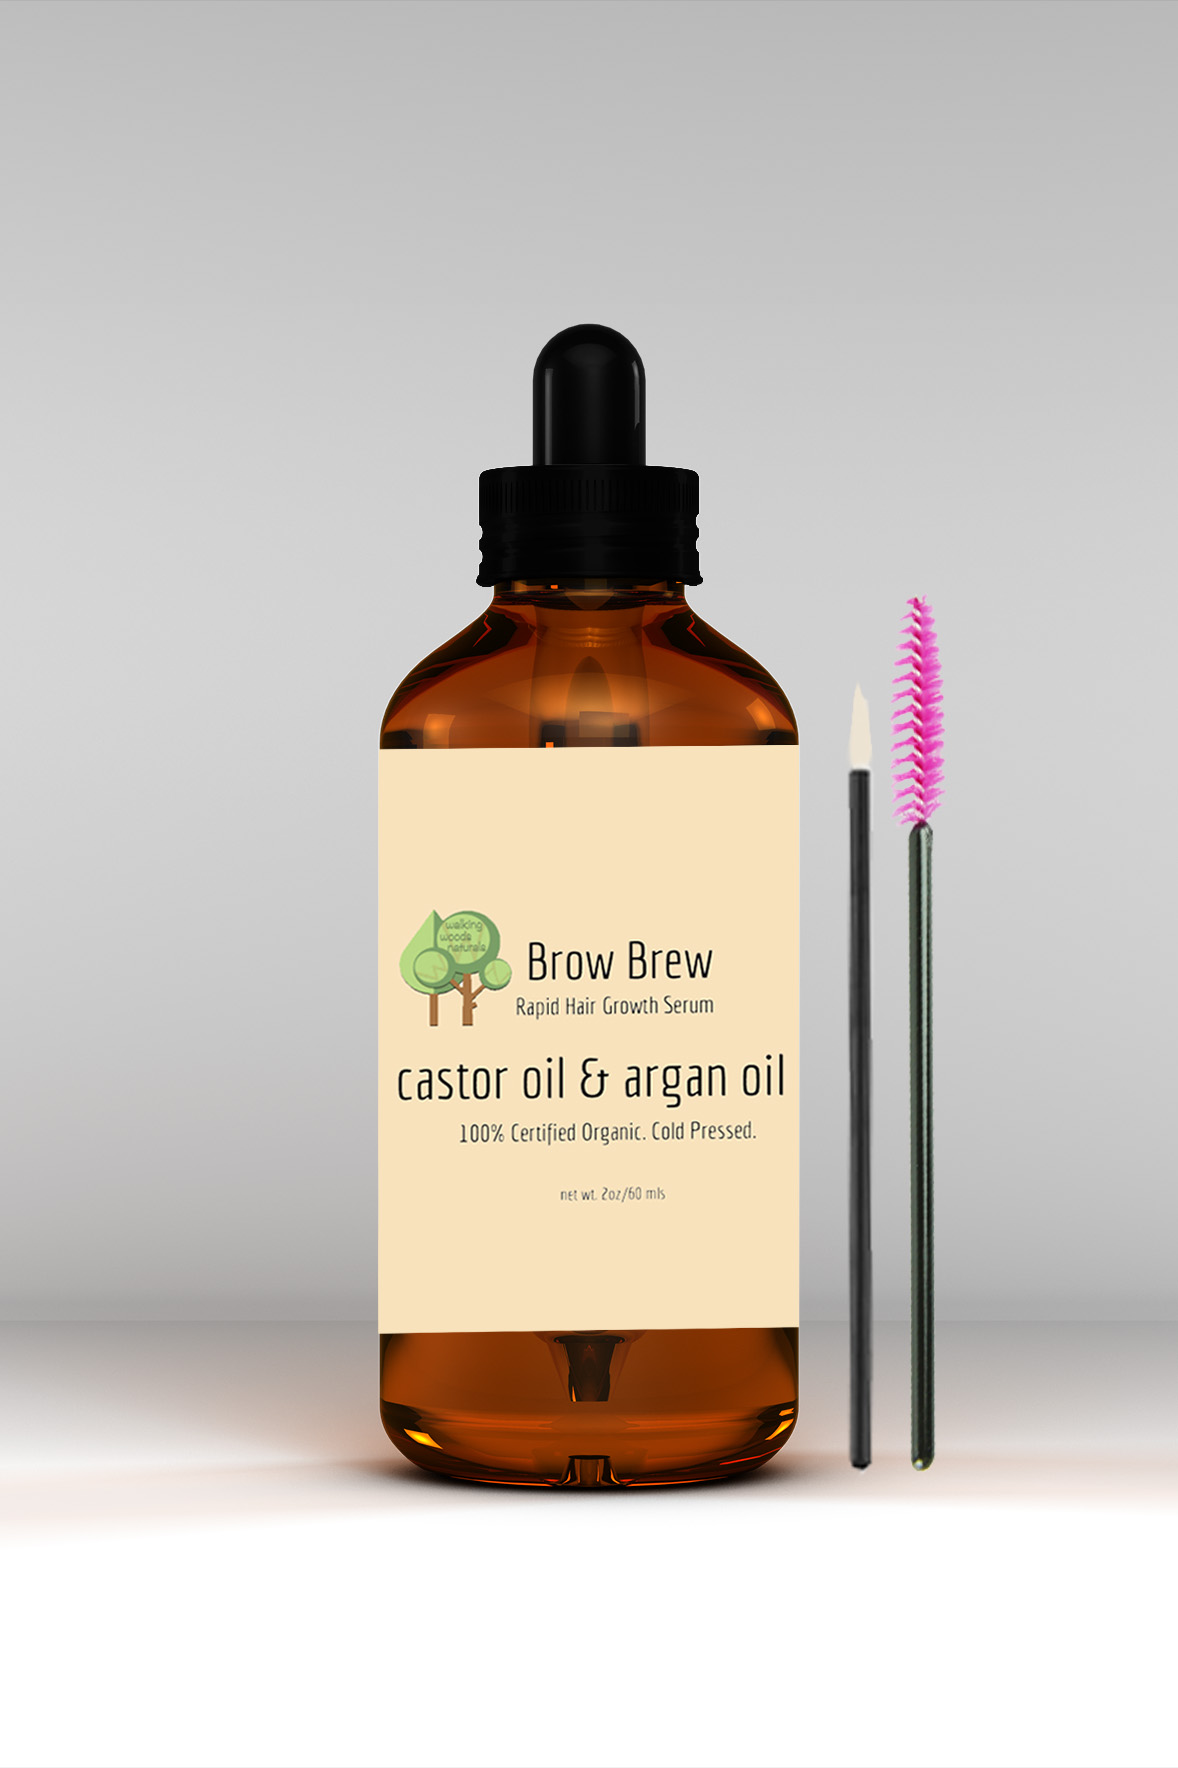 Grow & Shape your brows NATURALLY with Castor & Argan Oil !